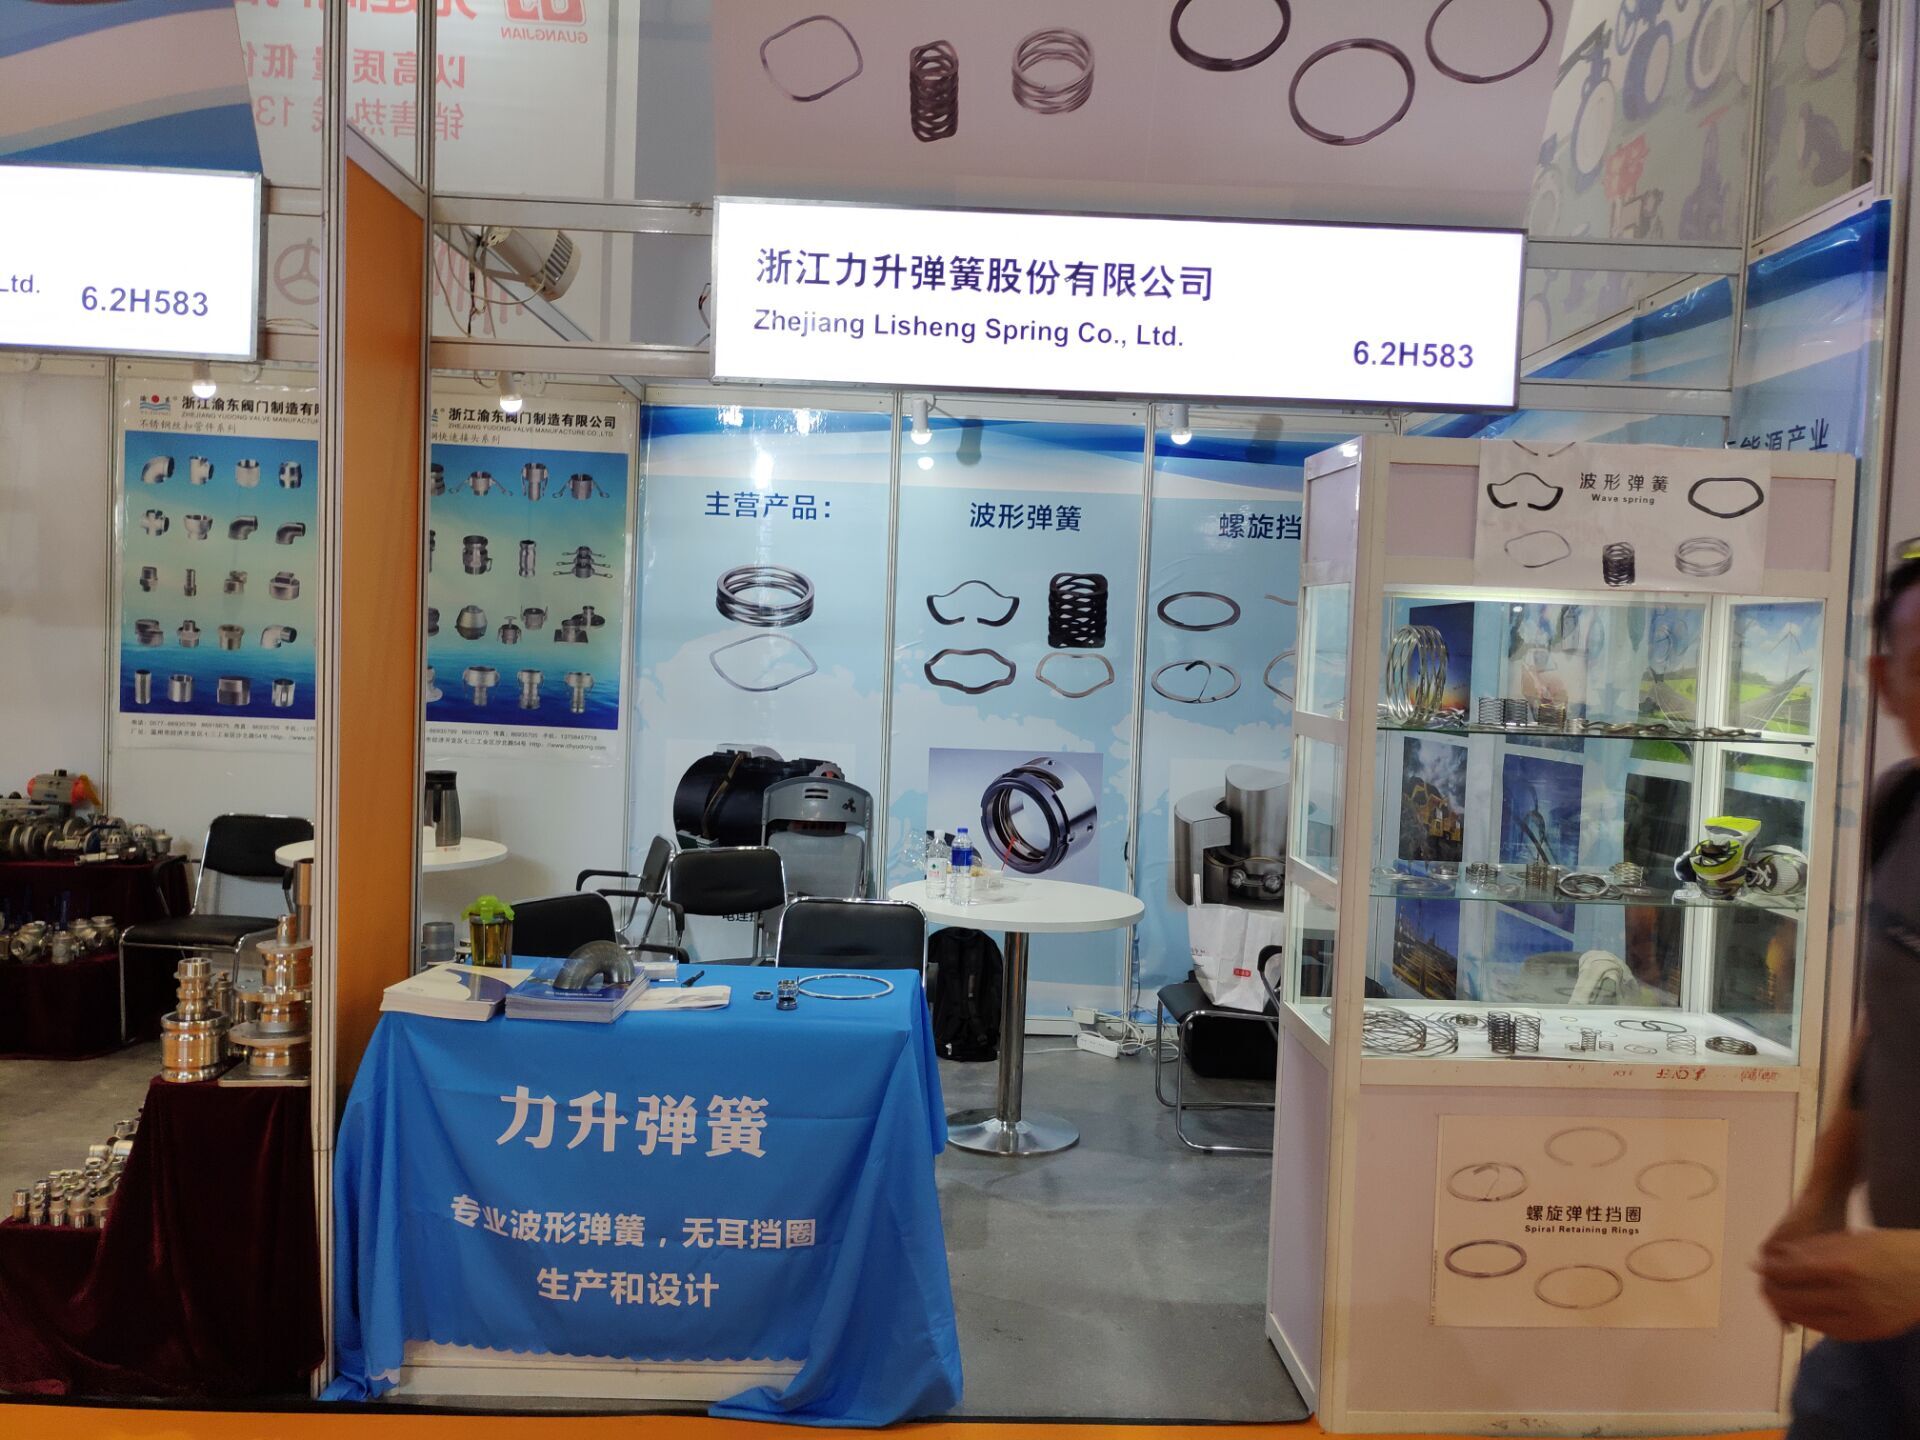 We attented 2019 FLOWTECH CHINA on June 3-5 in shanghai